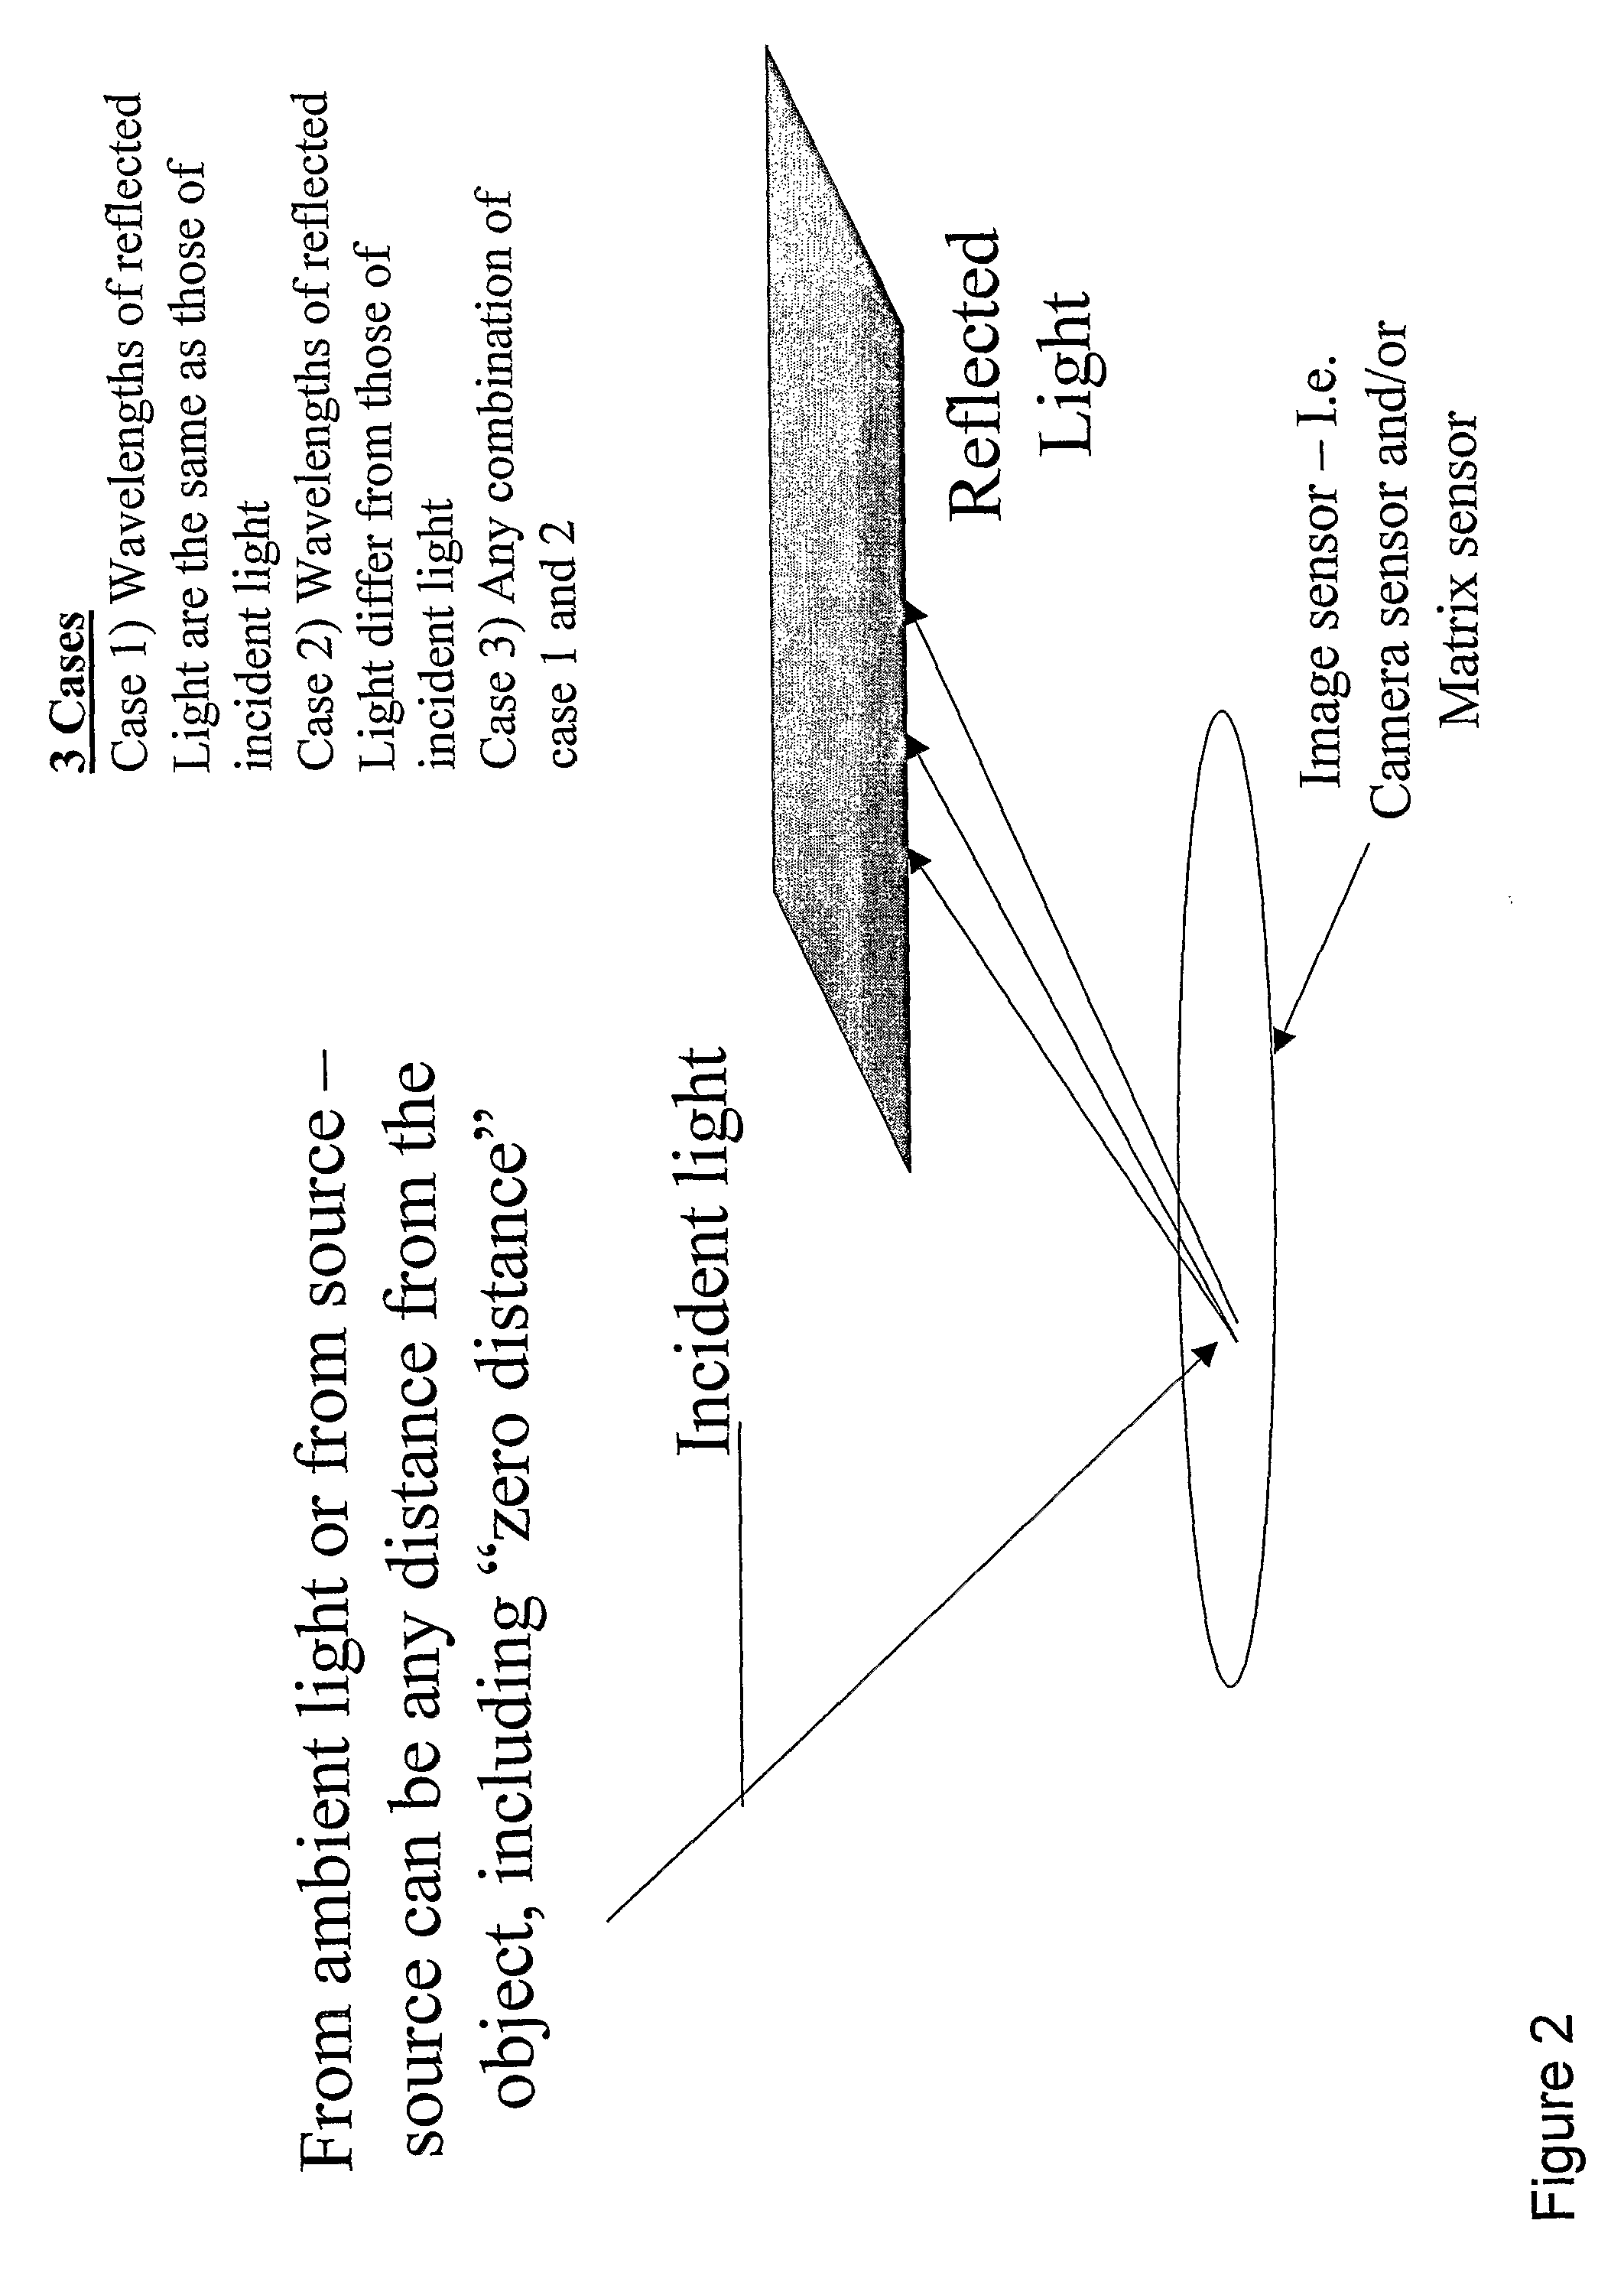 Optical sensor device and image processing unit for measuring chemical concentrations, chemical saturations and biophysical parameters